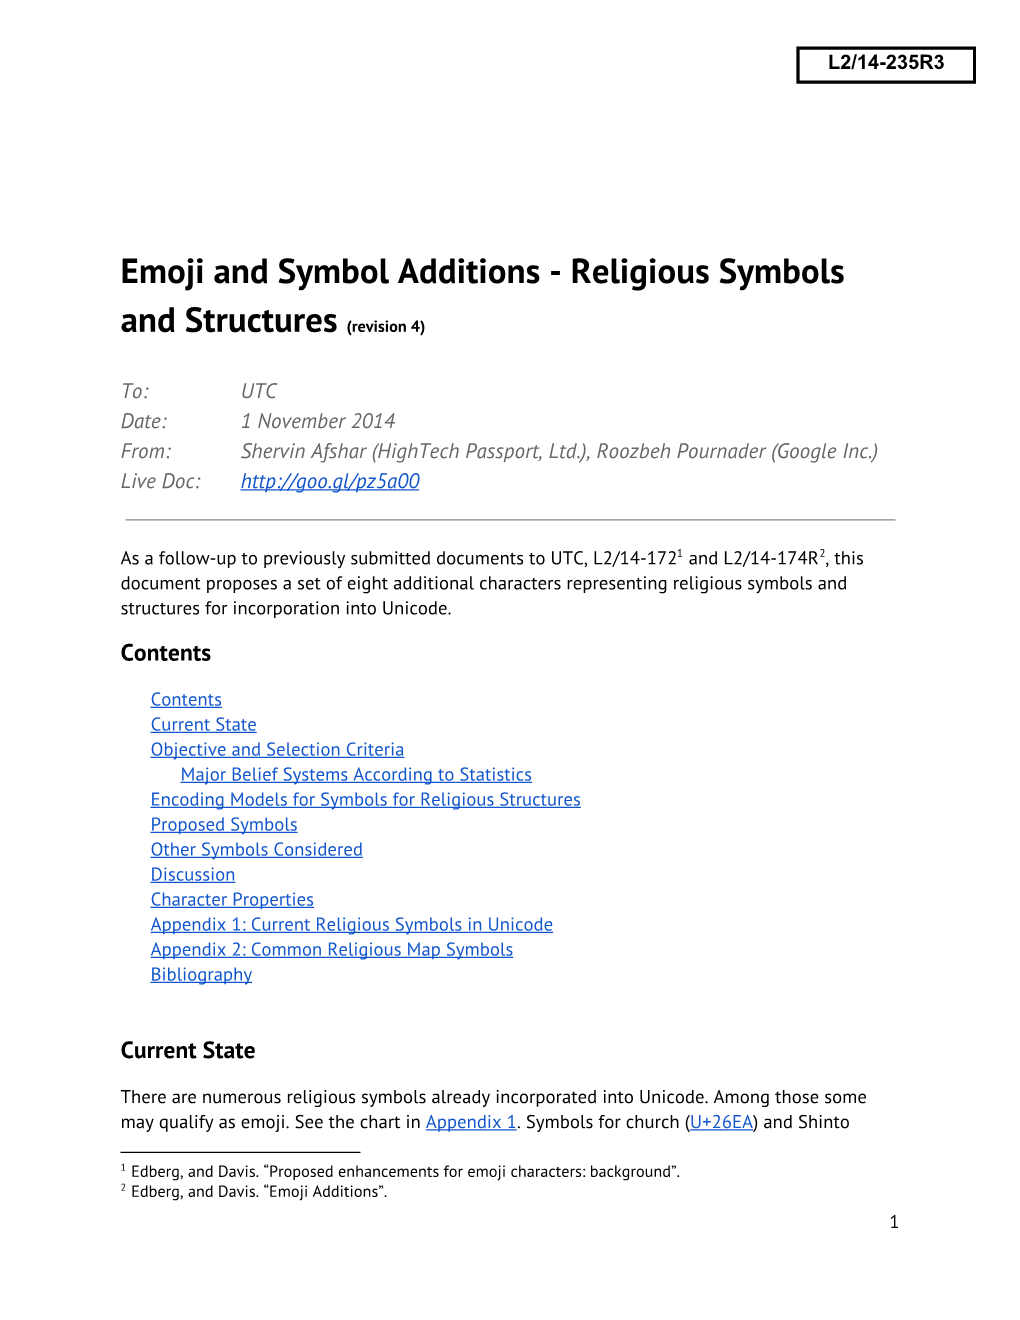 Emoji and Symbol Additions - Religious Symbols and Structures (Revision 4)